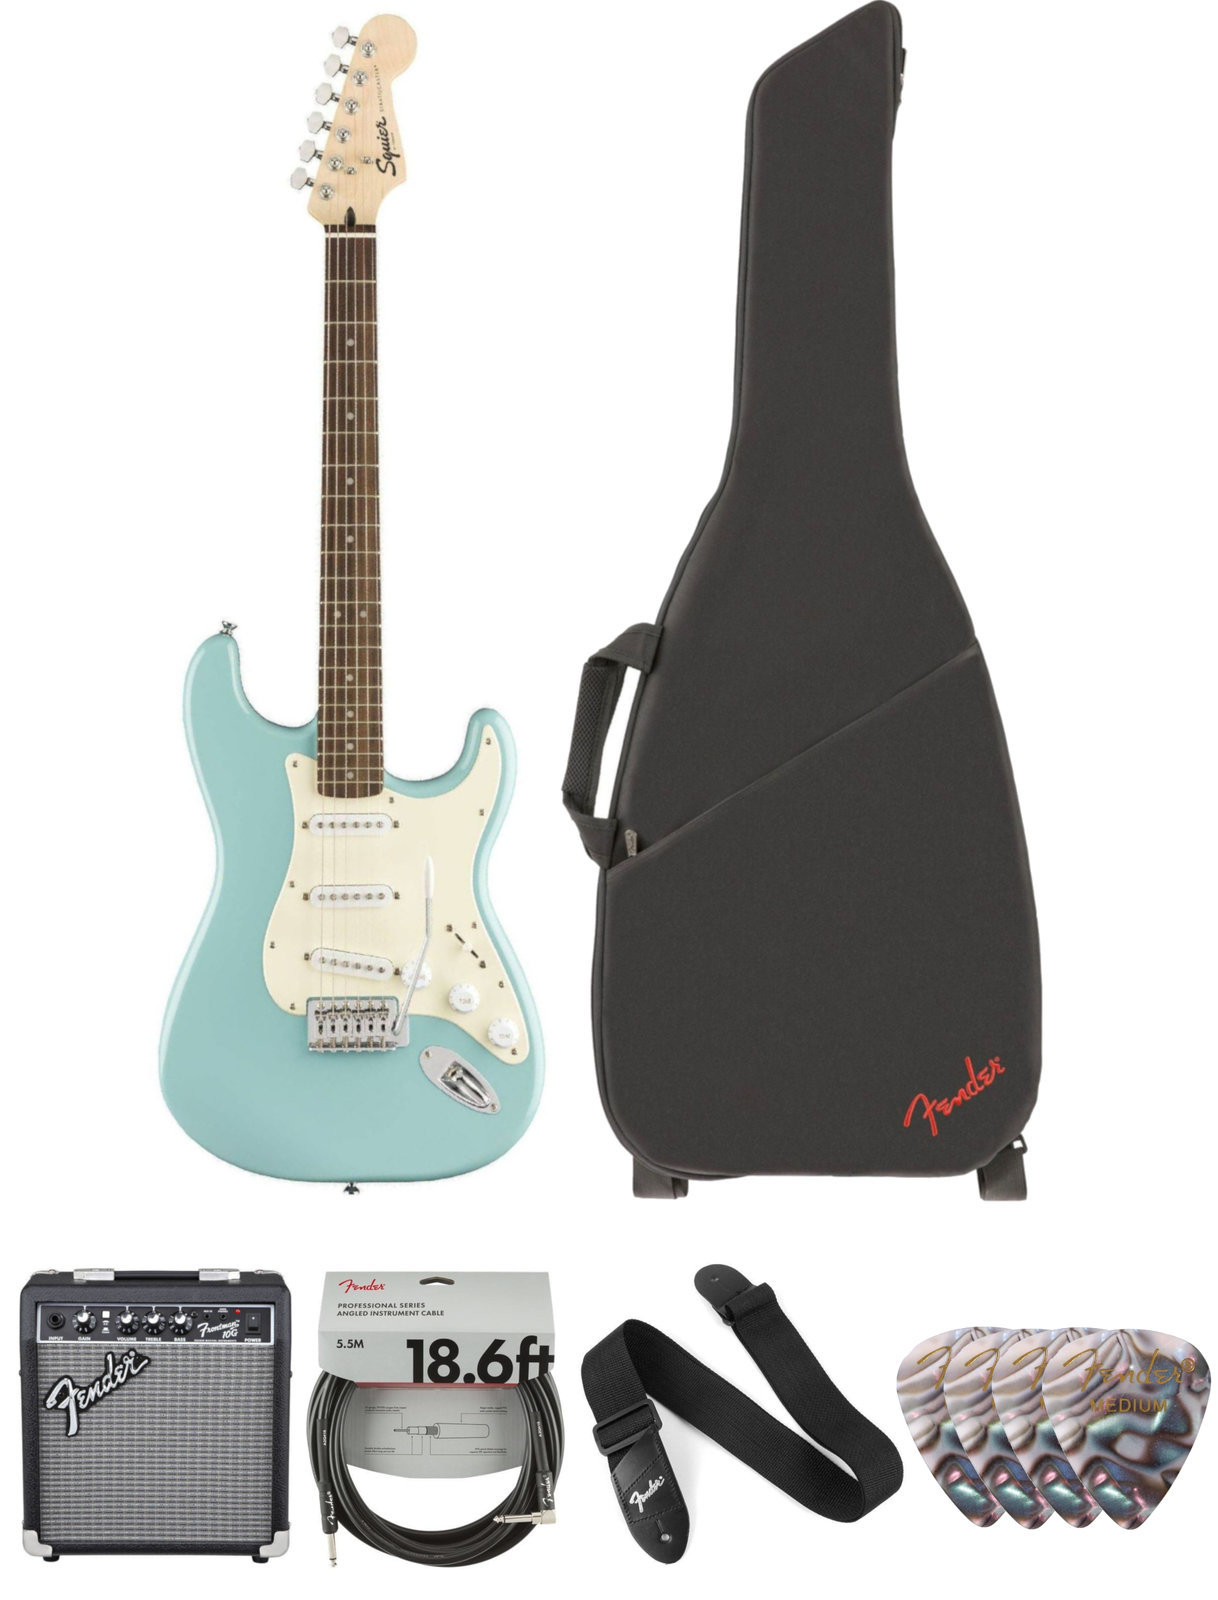 Electric guitar Fender Squier Bullet Stratocaster Tremolo IL Tropical Turquoise Deluxe SET Tropical Turquoise